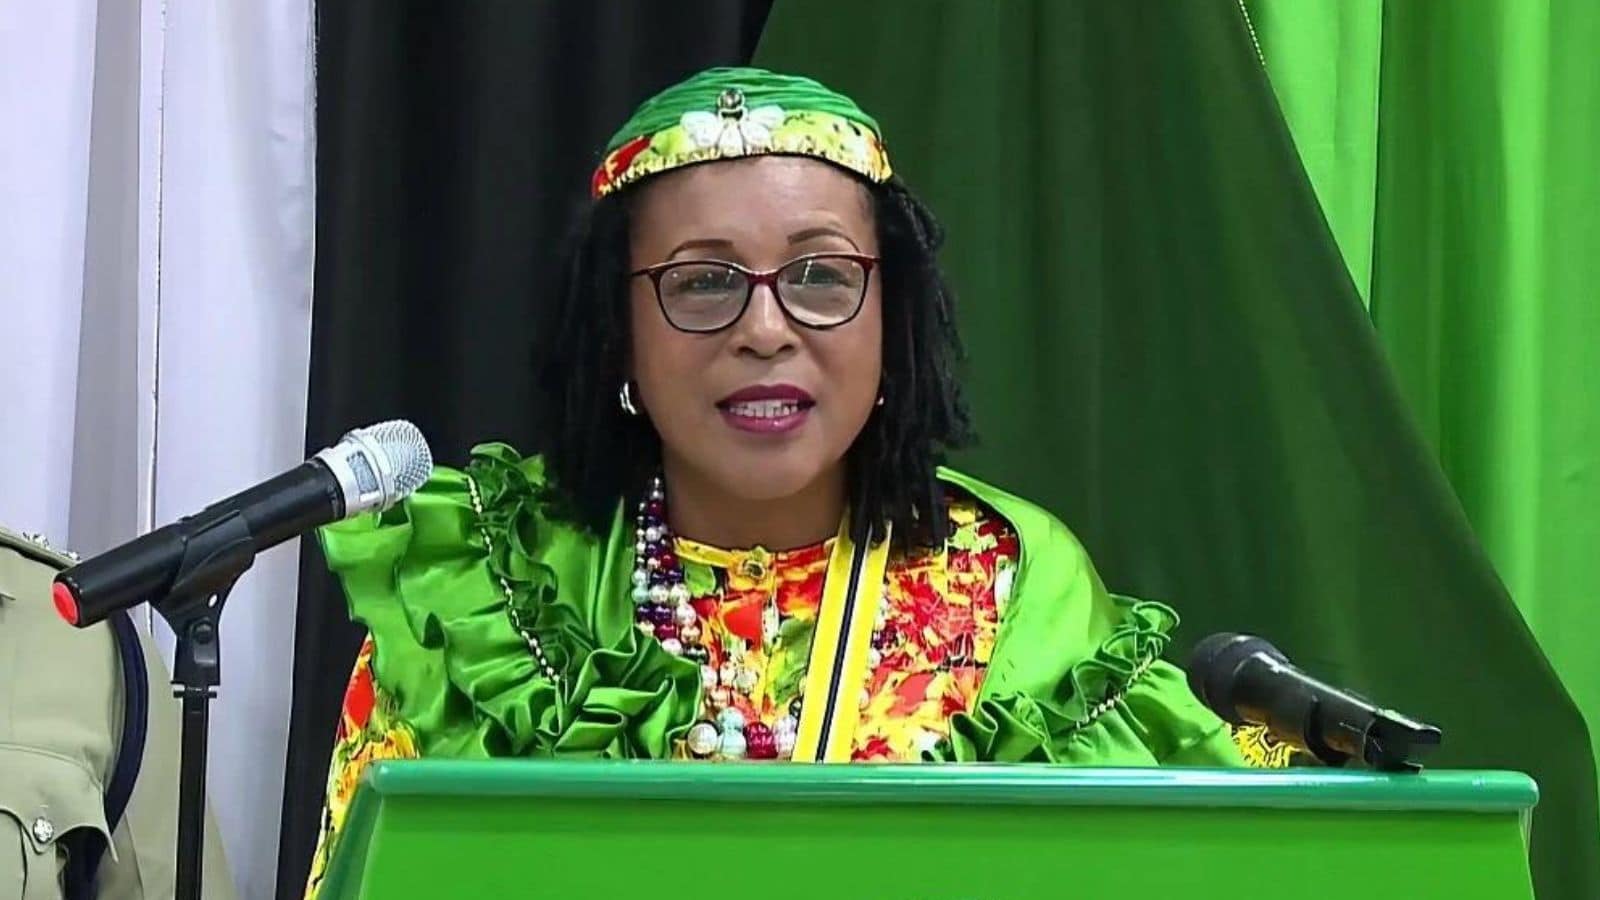 Historic: Dominica appoints first female president